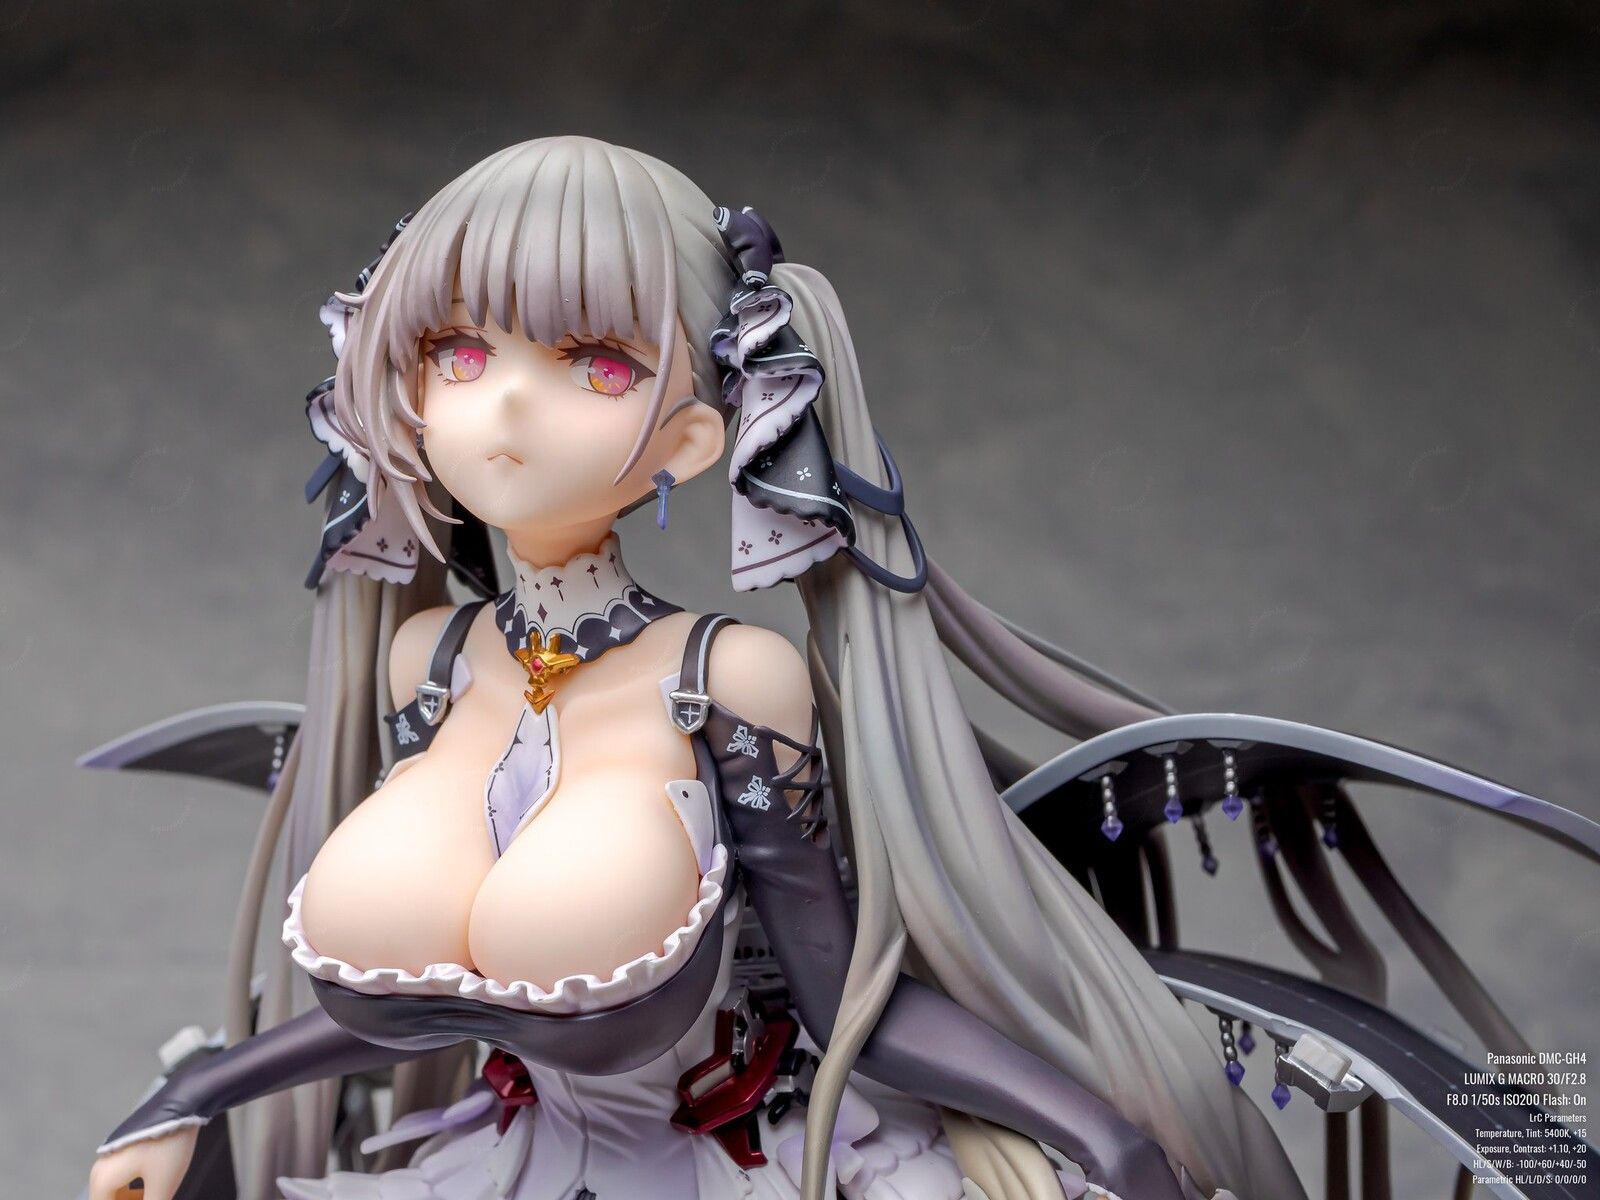 【Image】Recent beautiful girl figures, too good and too naughty wwwwww 1